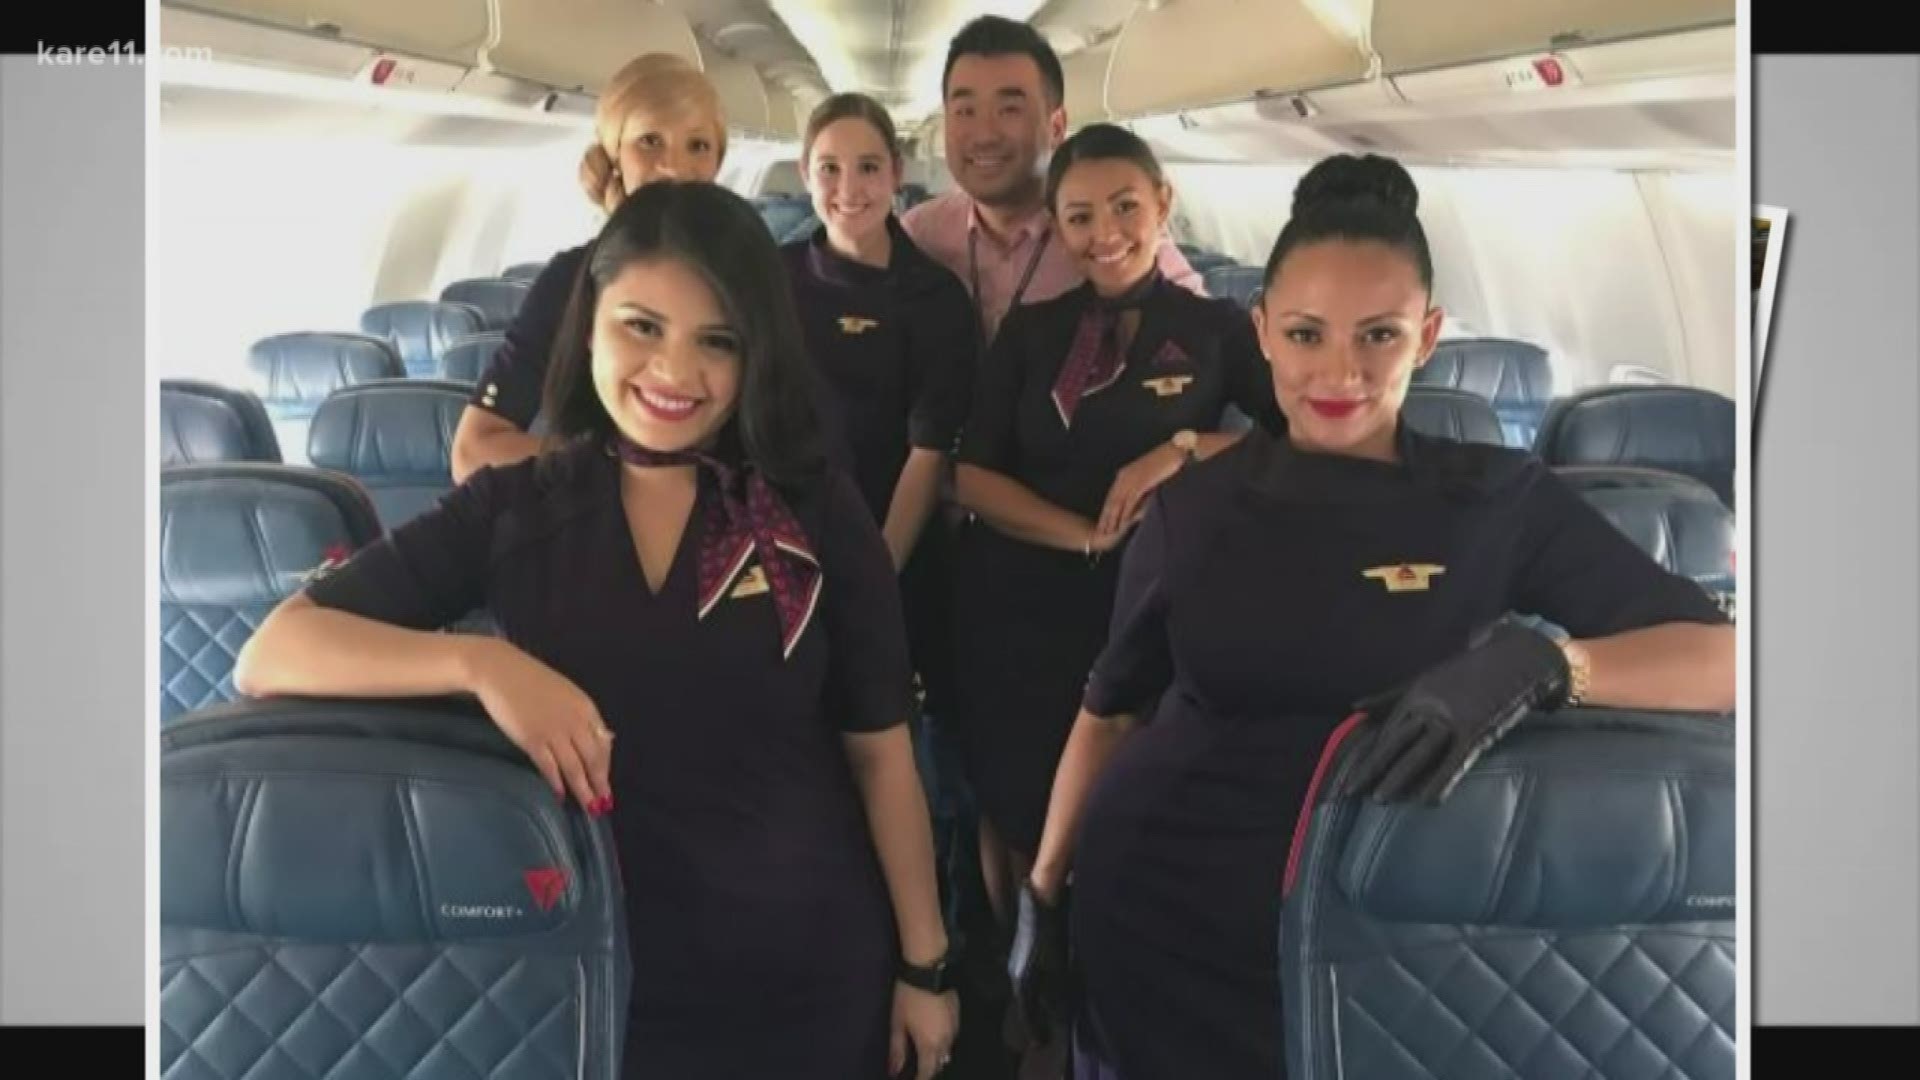 Want to be a Delta flight attendant? Applications now open